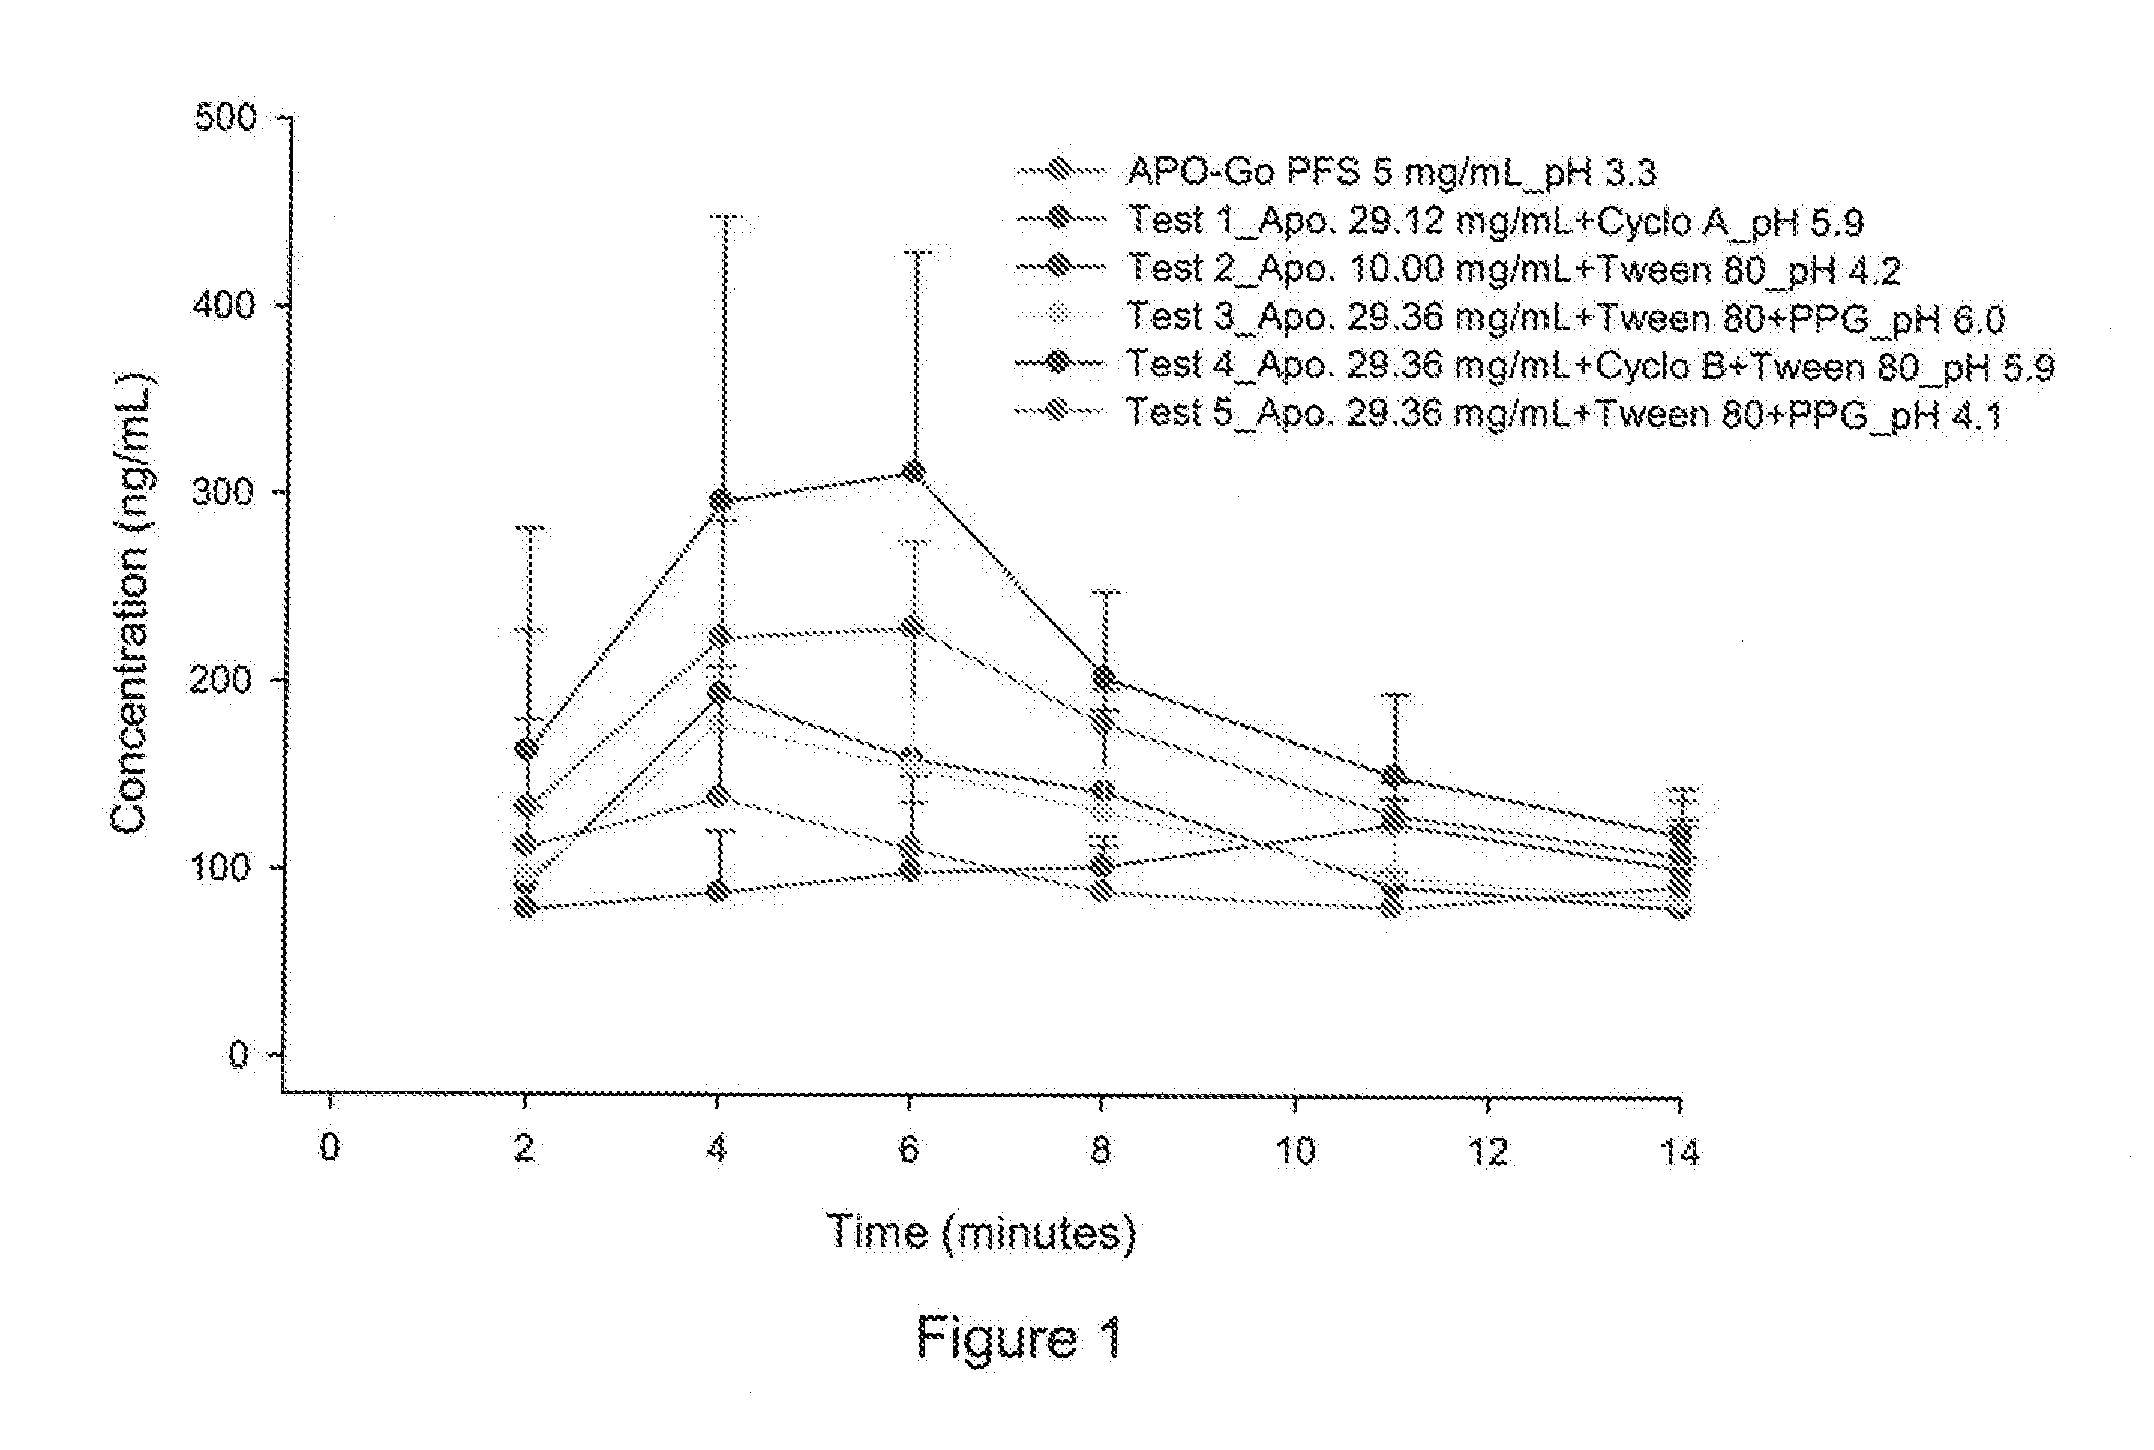 Therapeutical composition containing apomorphine as active ingredient